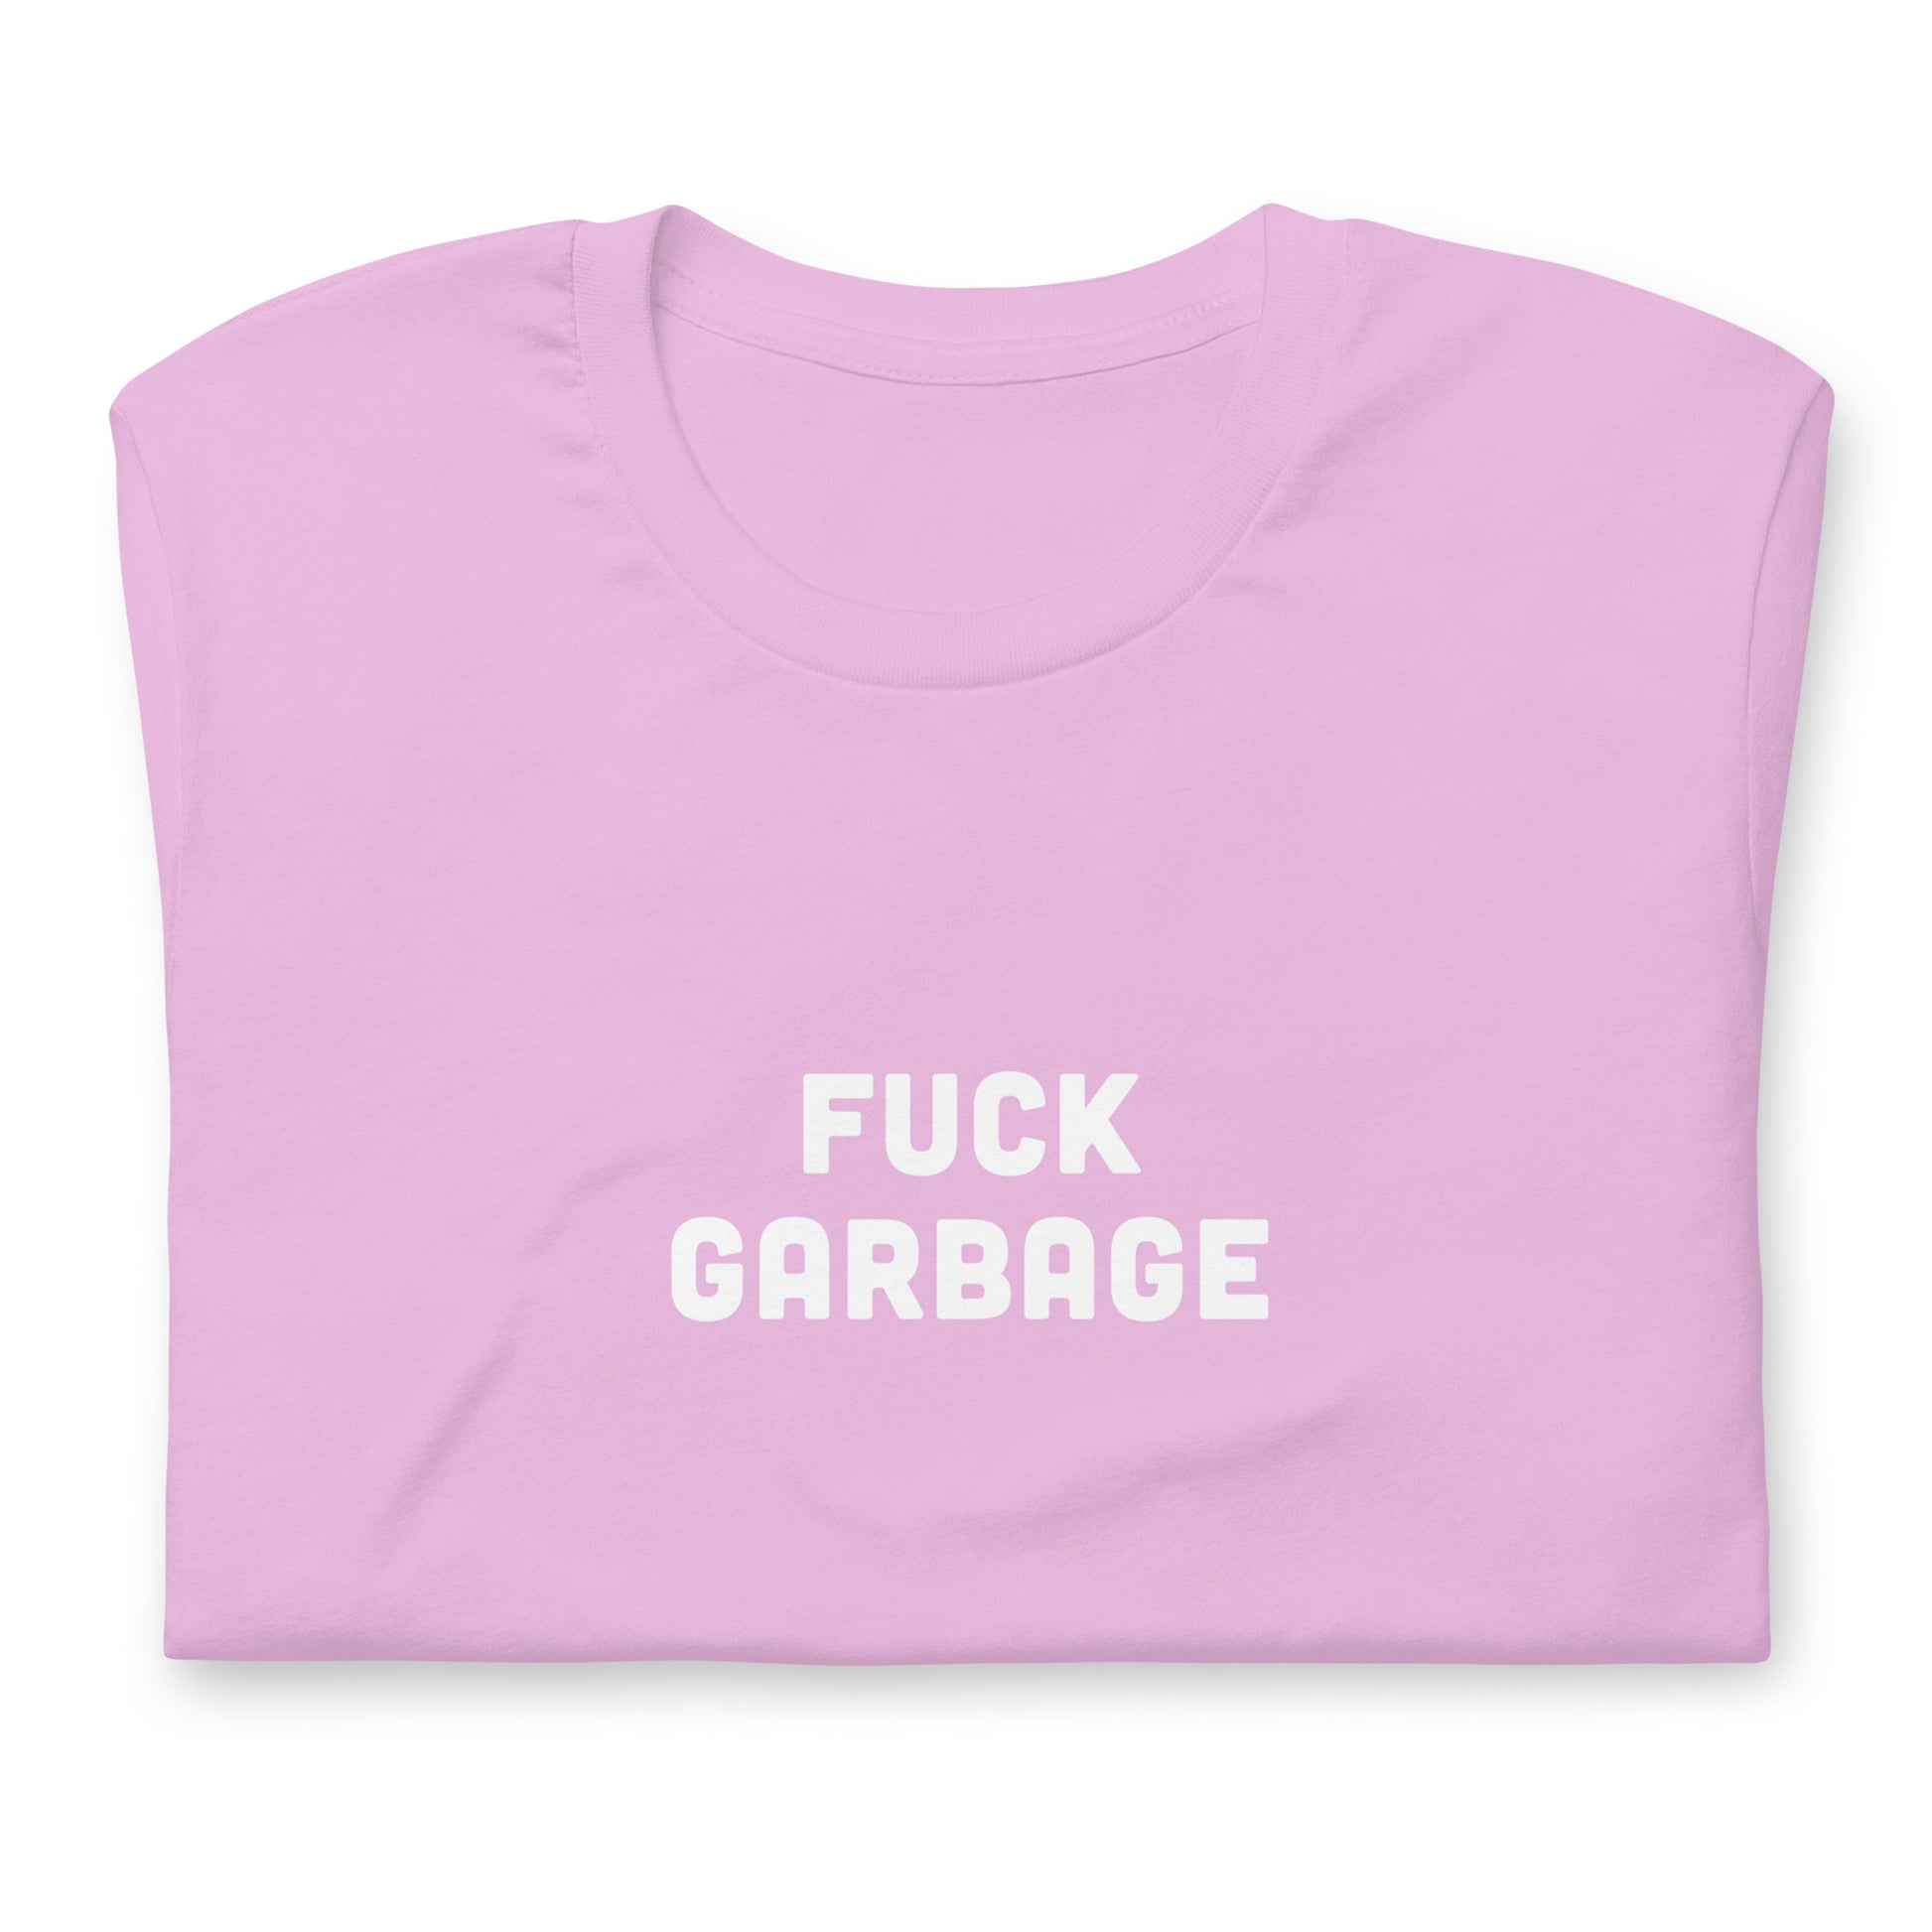 Fuck Garbage T-Shirt Size 2XL Color Forest